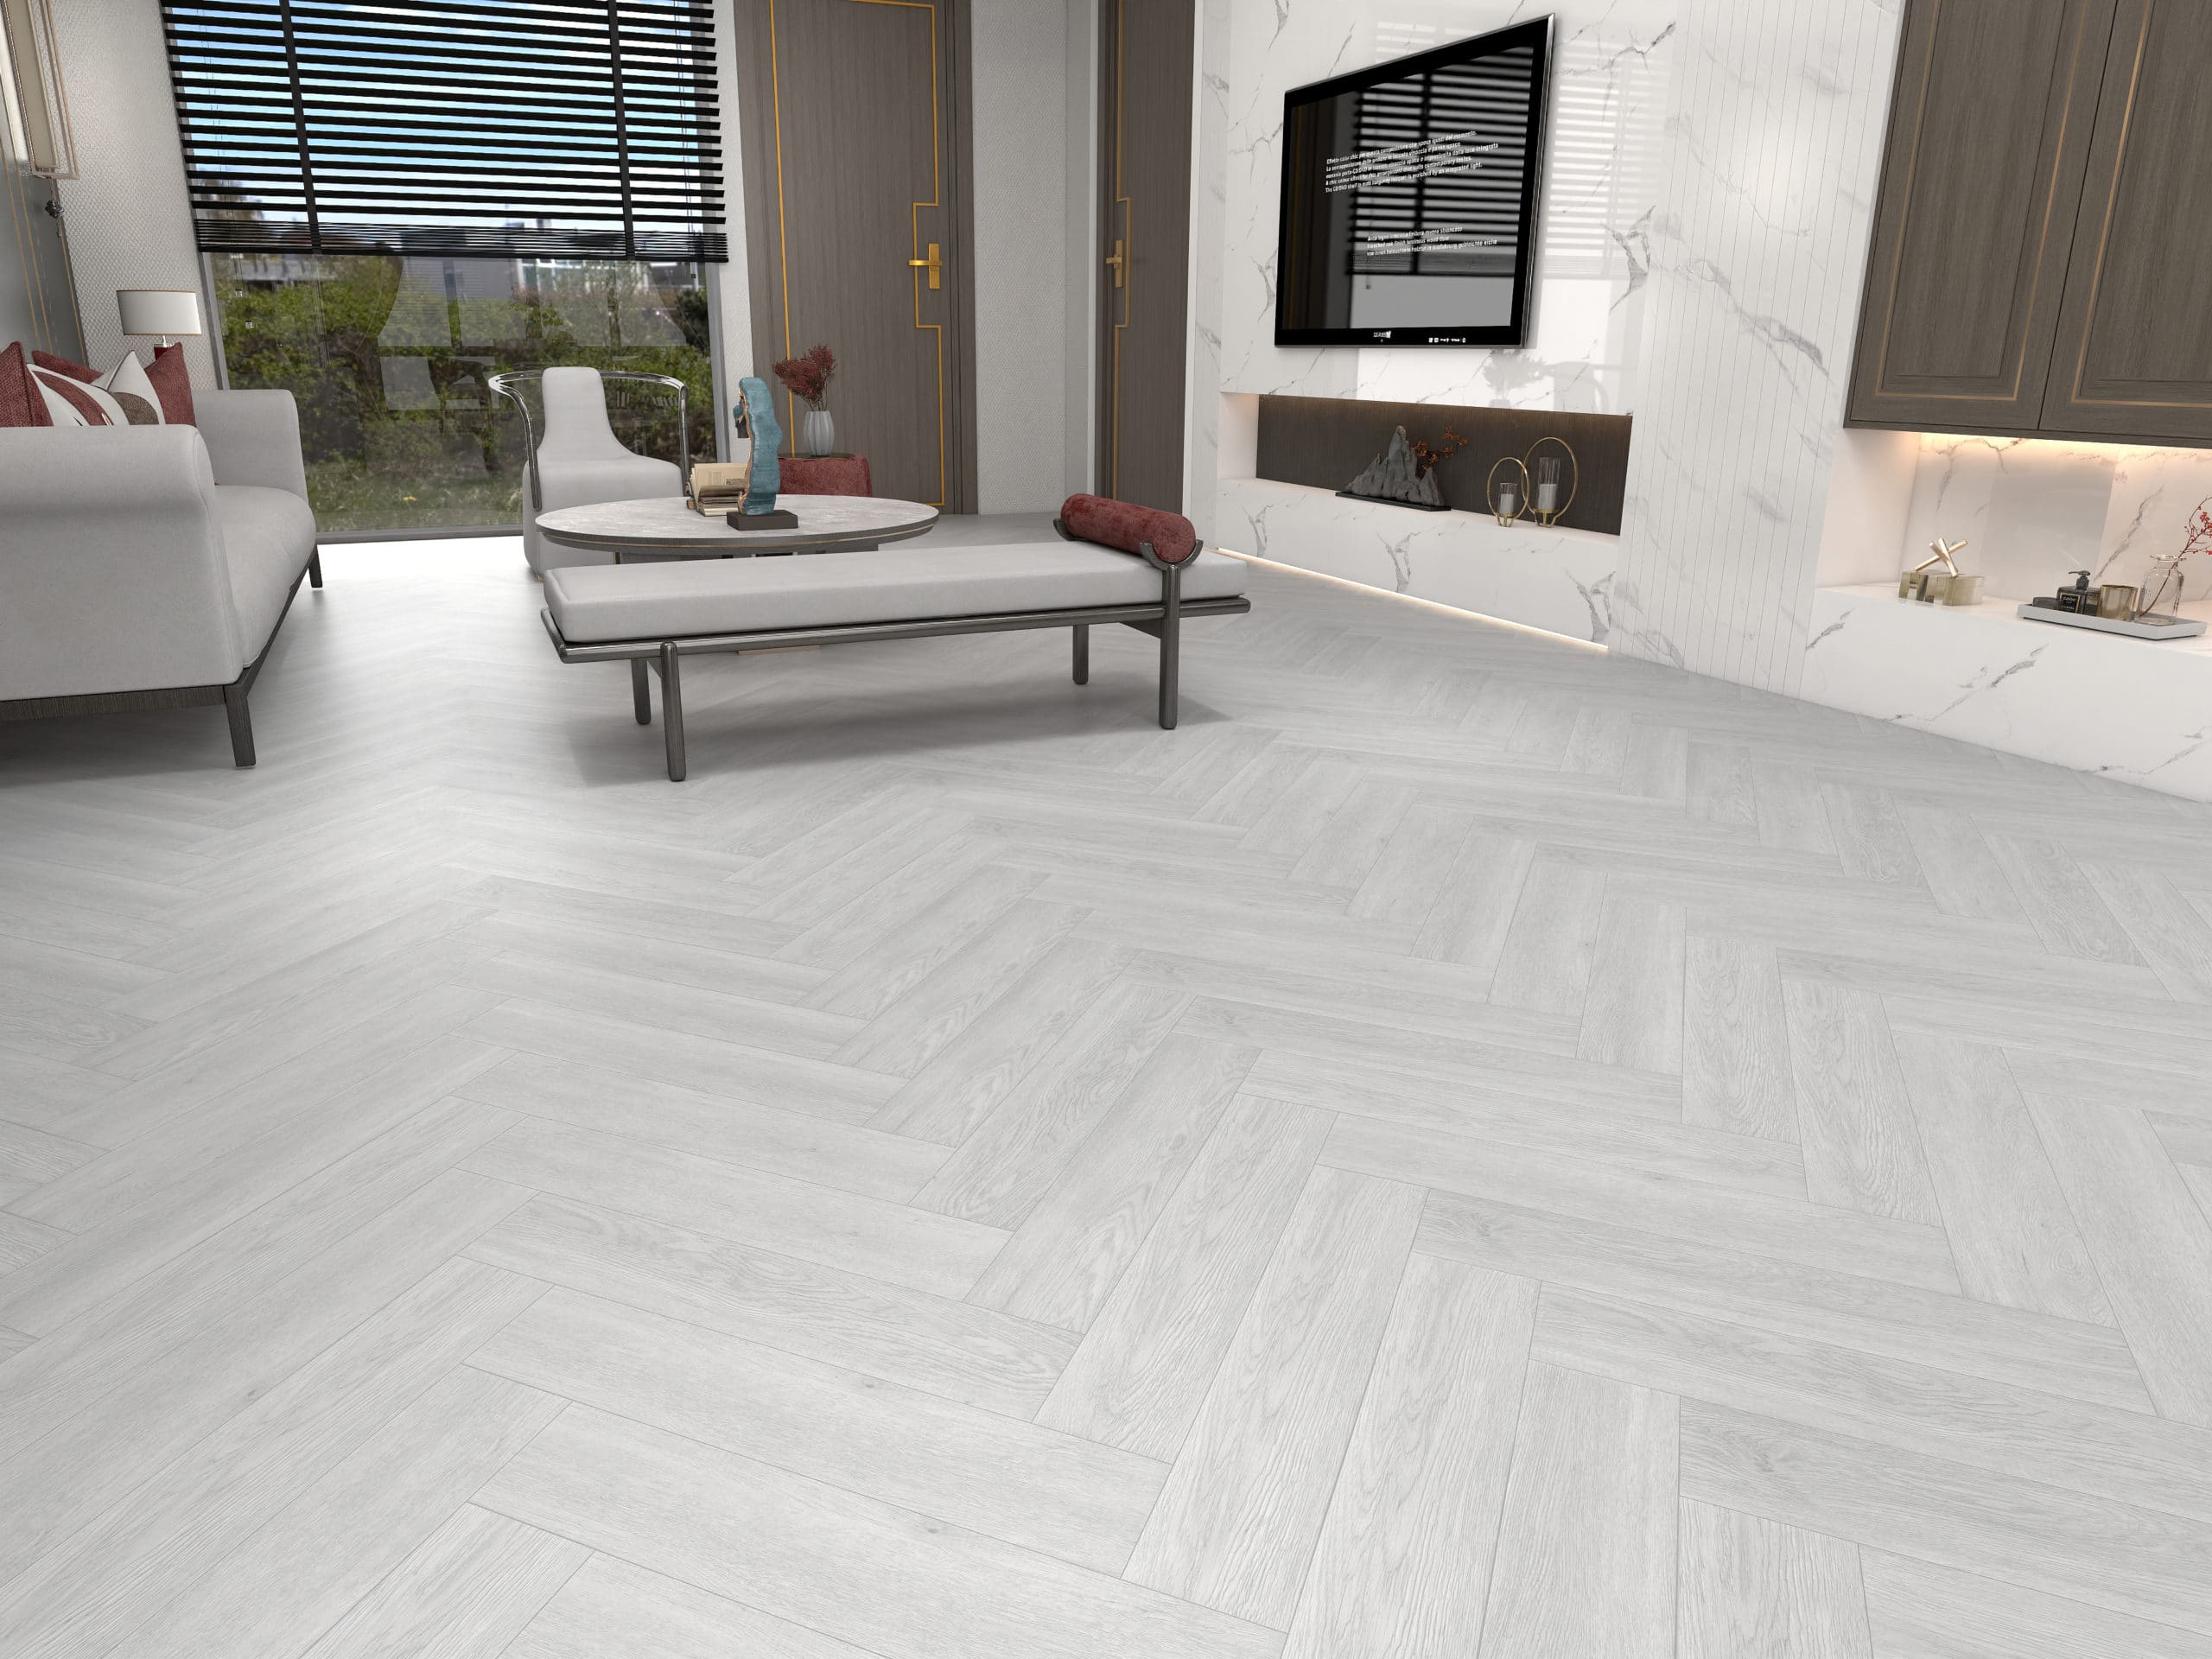 showing a room with the floor covered by hybrid vinyl plank flooring that is grey herringbone2